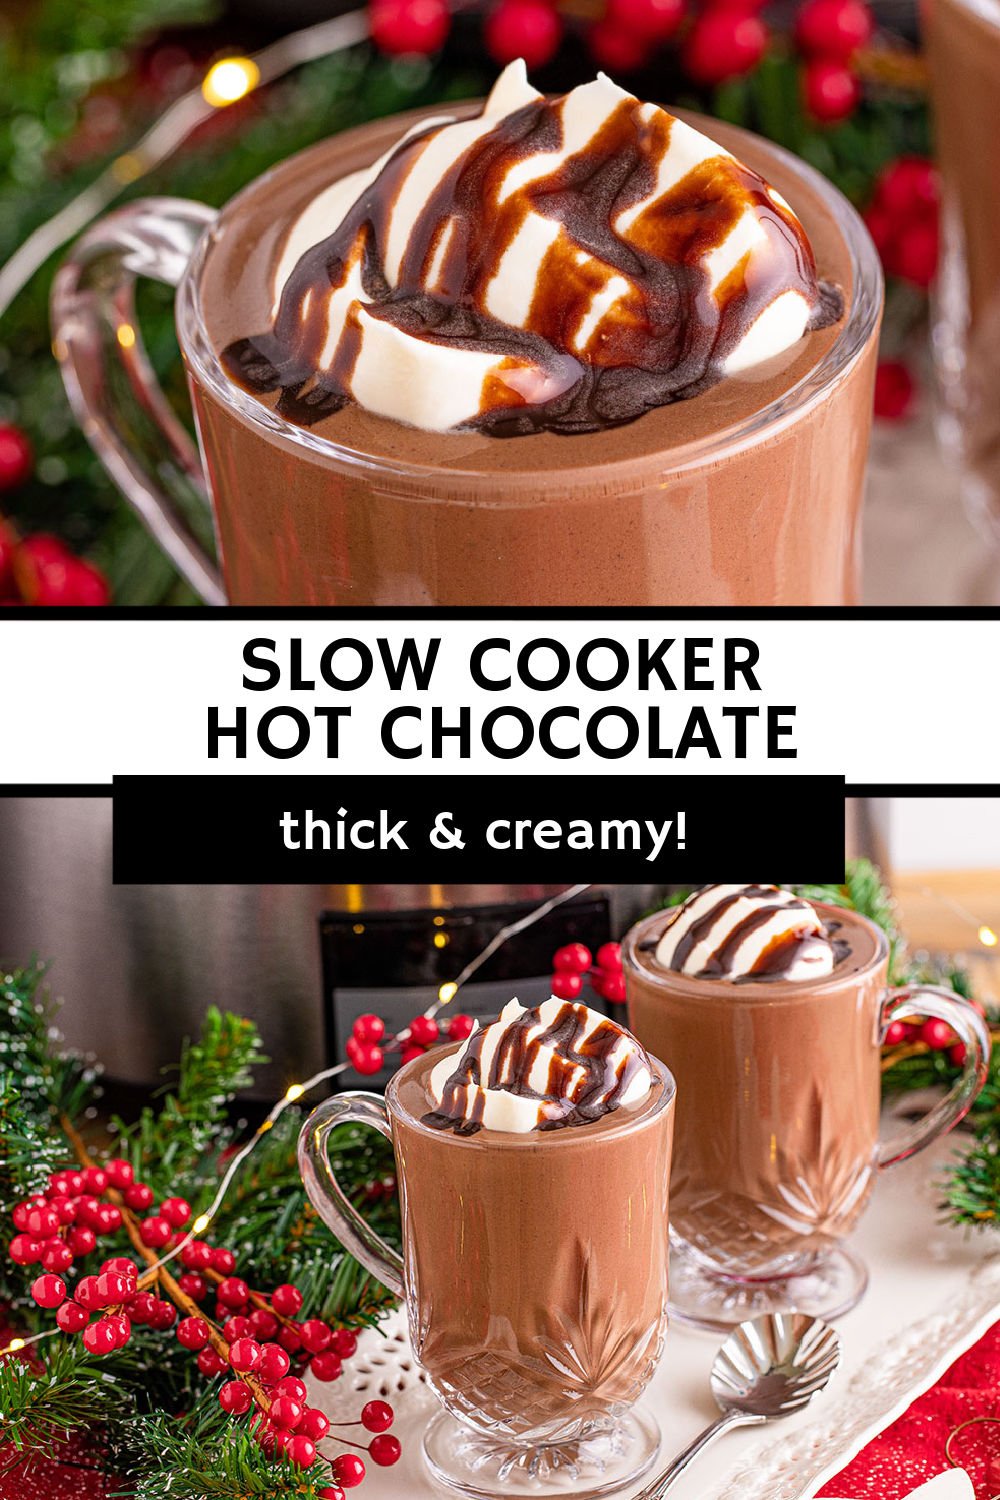 This slow cooker hot chocolate recipe is the absolute BEST! It's the perfect consistency, right between thin and thick.  It's smooth, rich, and drinks like velvet! The rich semi-sweet dark chocolate paired with heavy cream and sweetened condensed milk is unlike anything those boxed hot cocoa mixes have to offer! | www.persnicketyplates.com